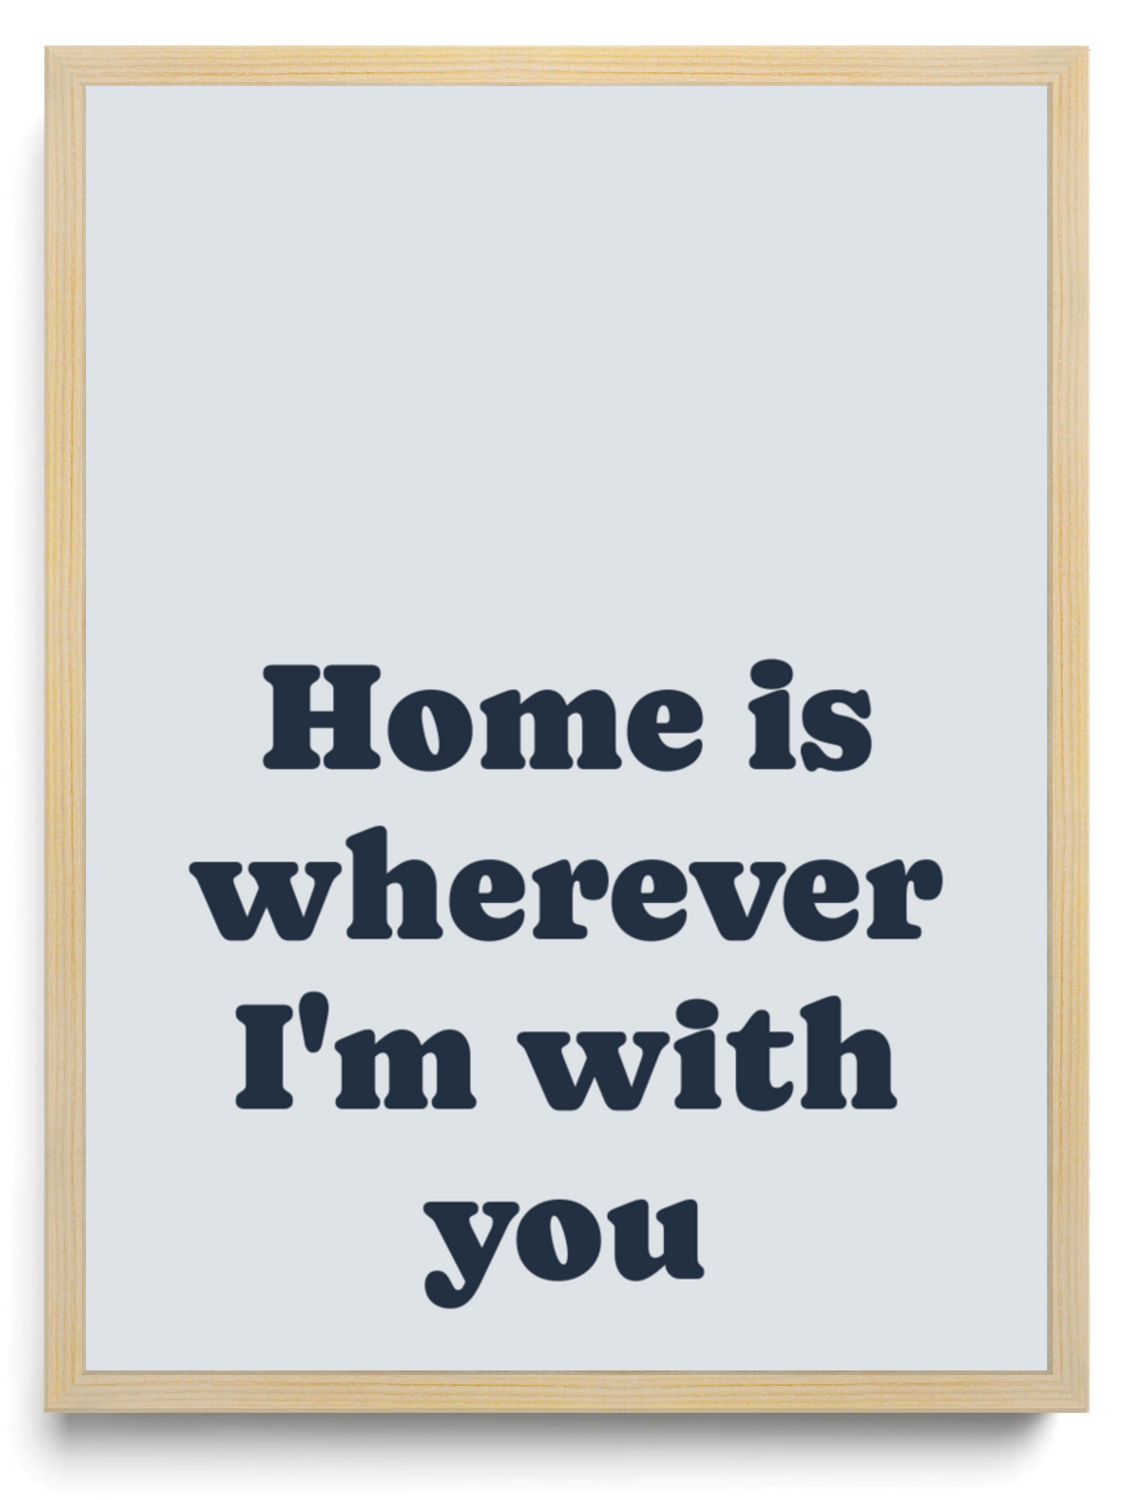 Home is wherever Im with you framed typographic print